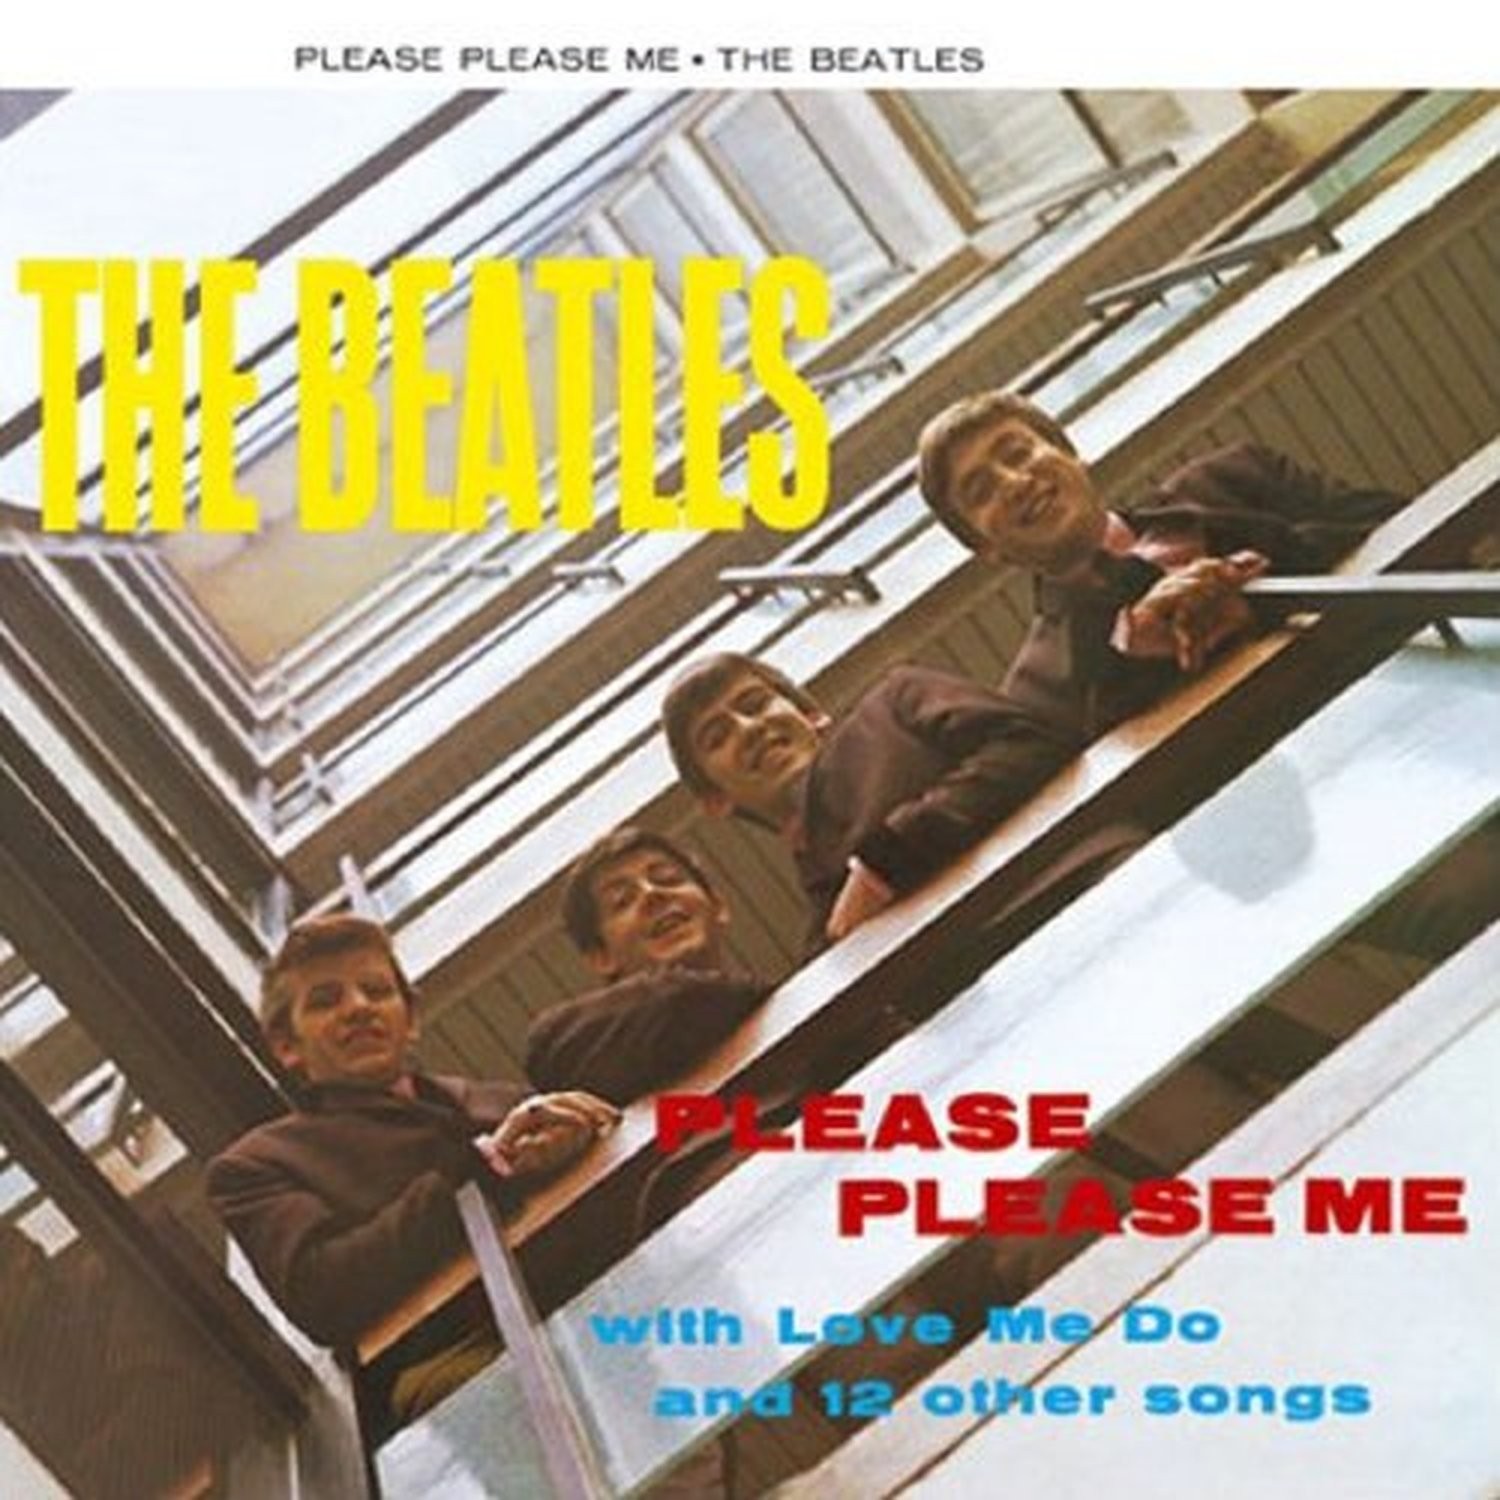 The Beatles Please Please Me Greeting Birthday Card Any Occasion Album Official